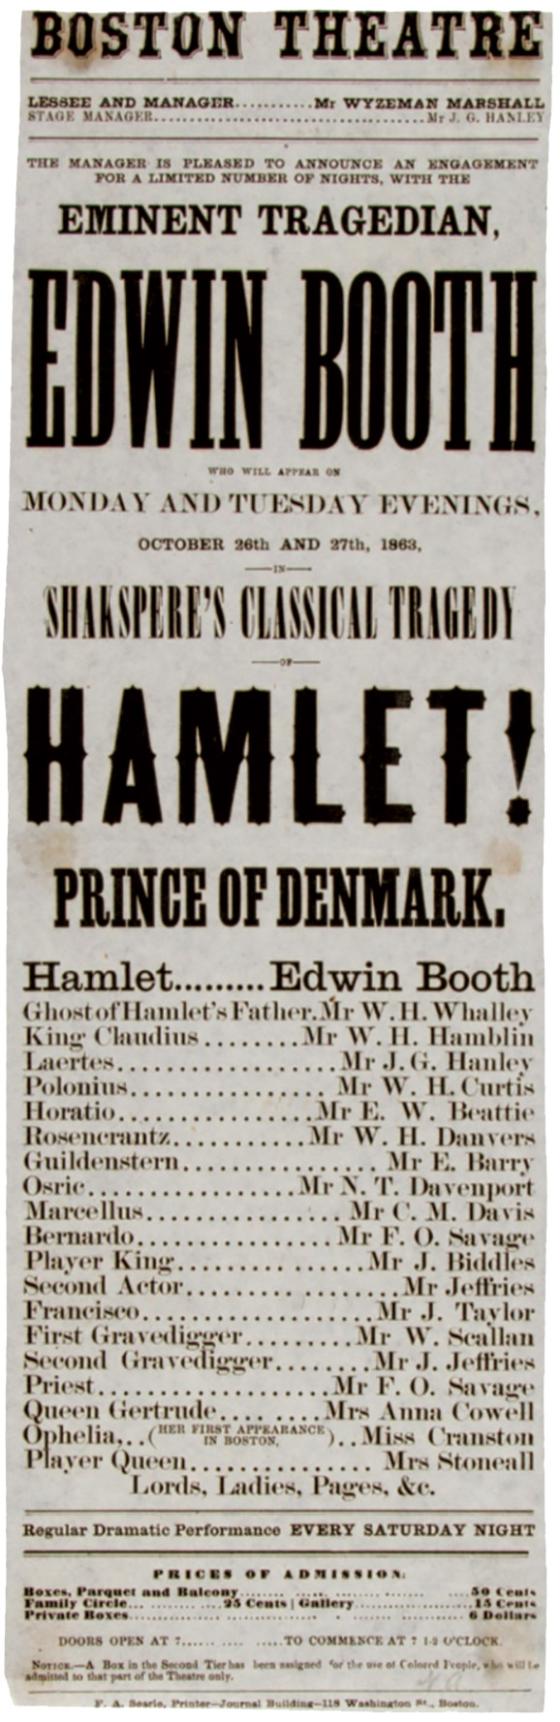 Newspaper clipping advertising Edwin Booth playing Hamlet at the Boston Theatre